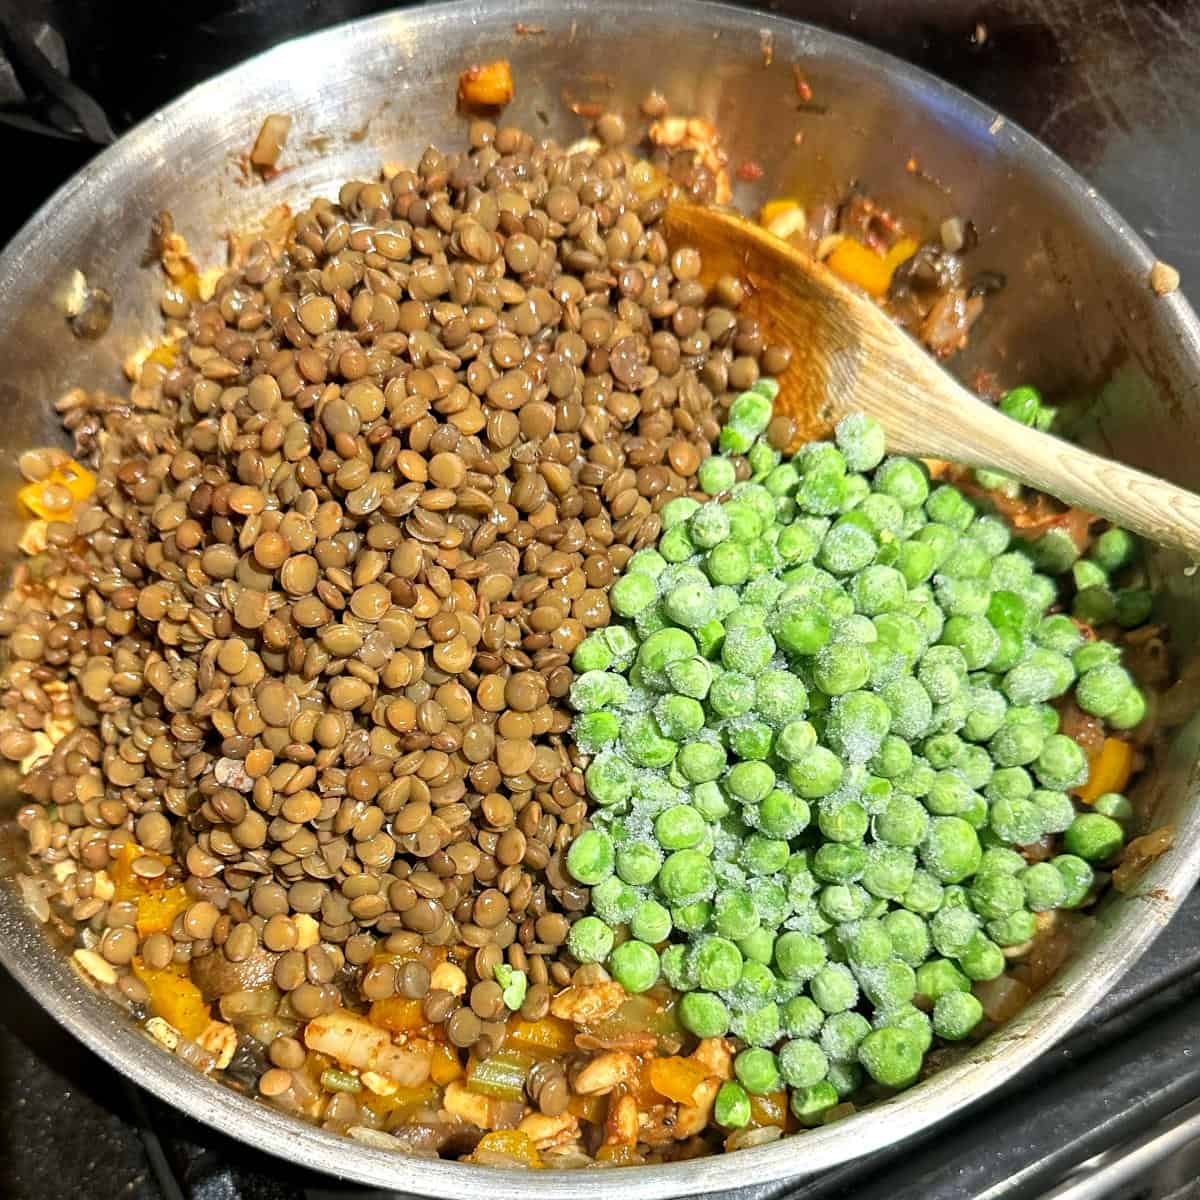 Lentils and peas added to skillet.